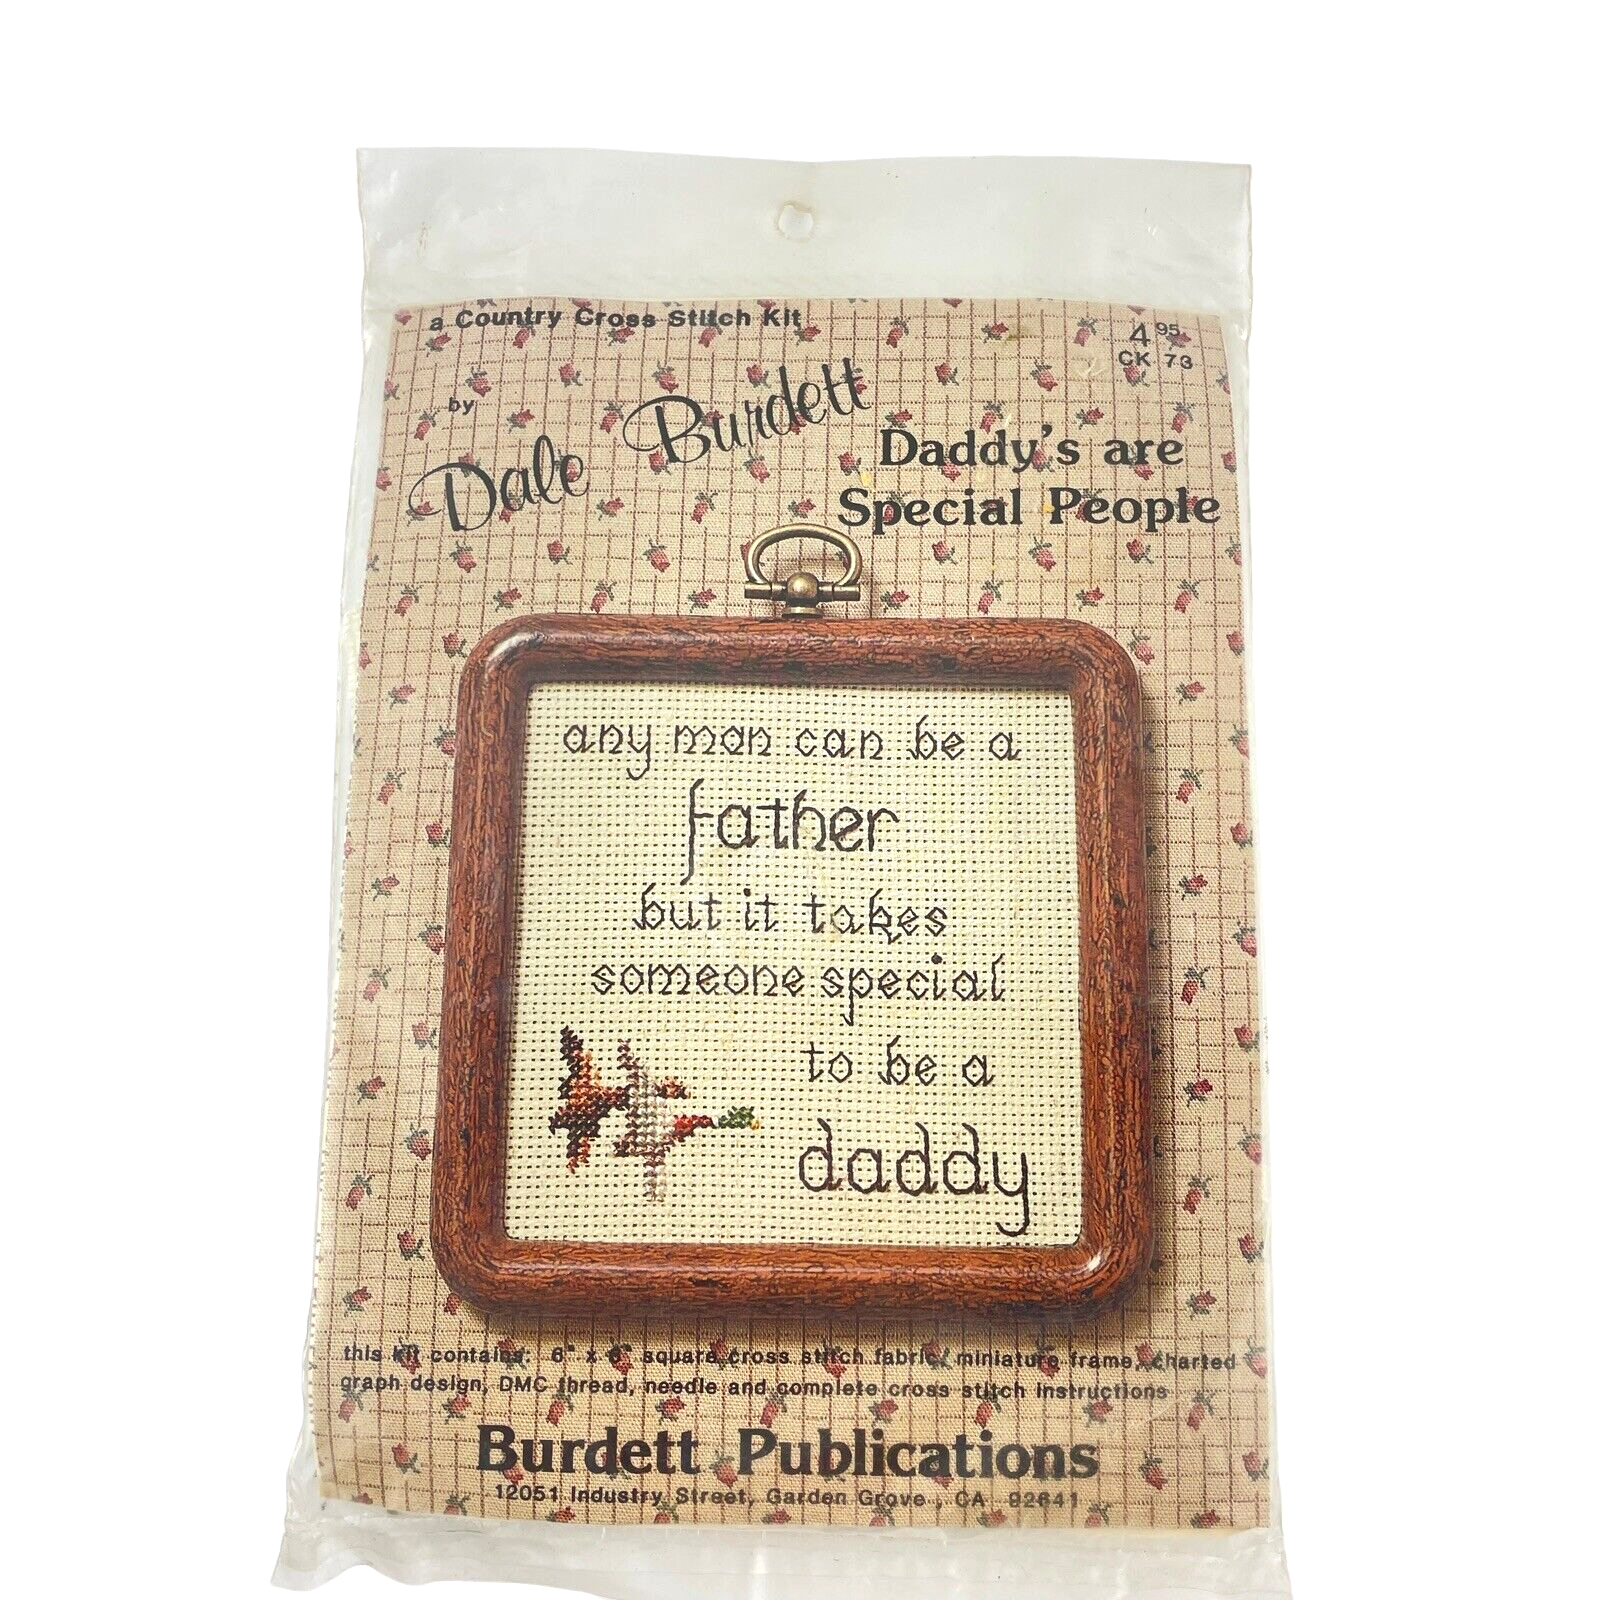 Dale Burdett Country Cross Stitch  Daddy's Are Special People Kit CK73 + Frame - $12.55